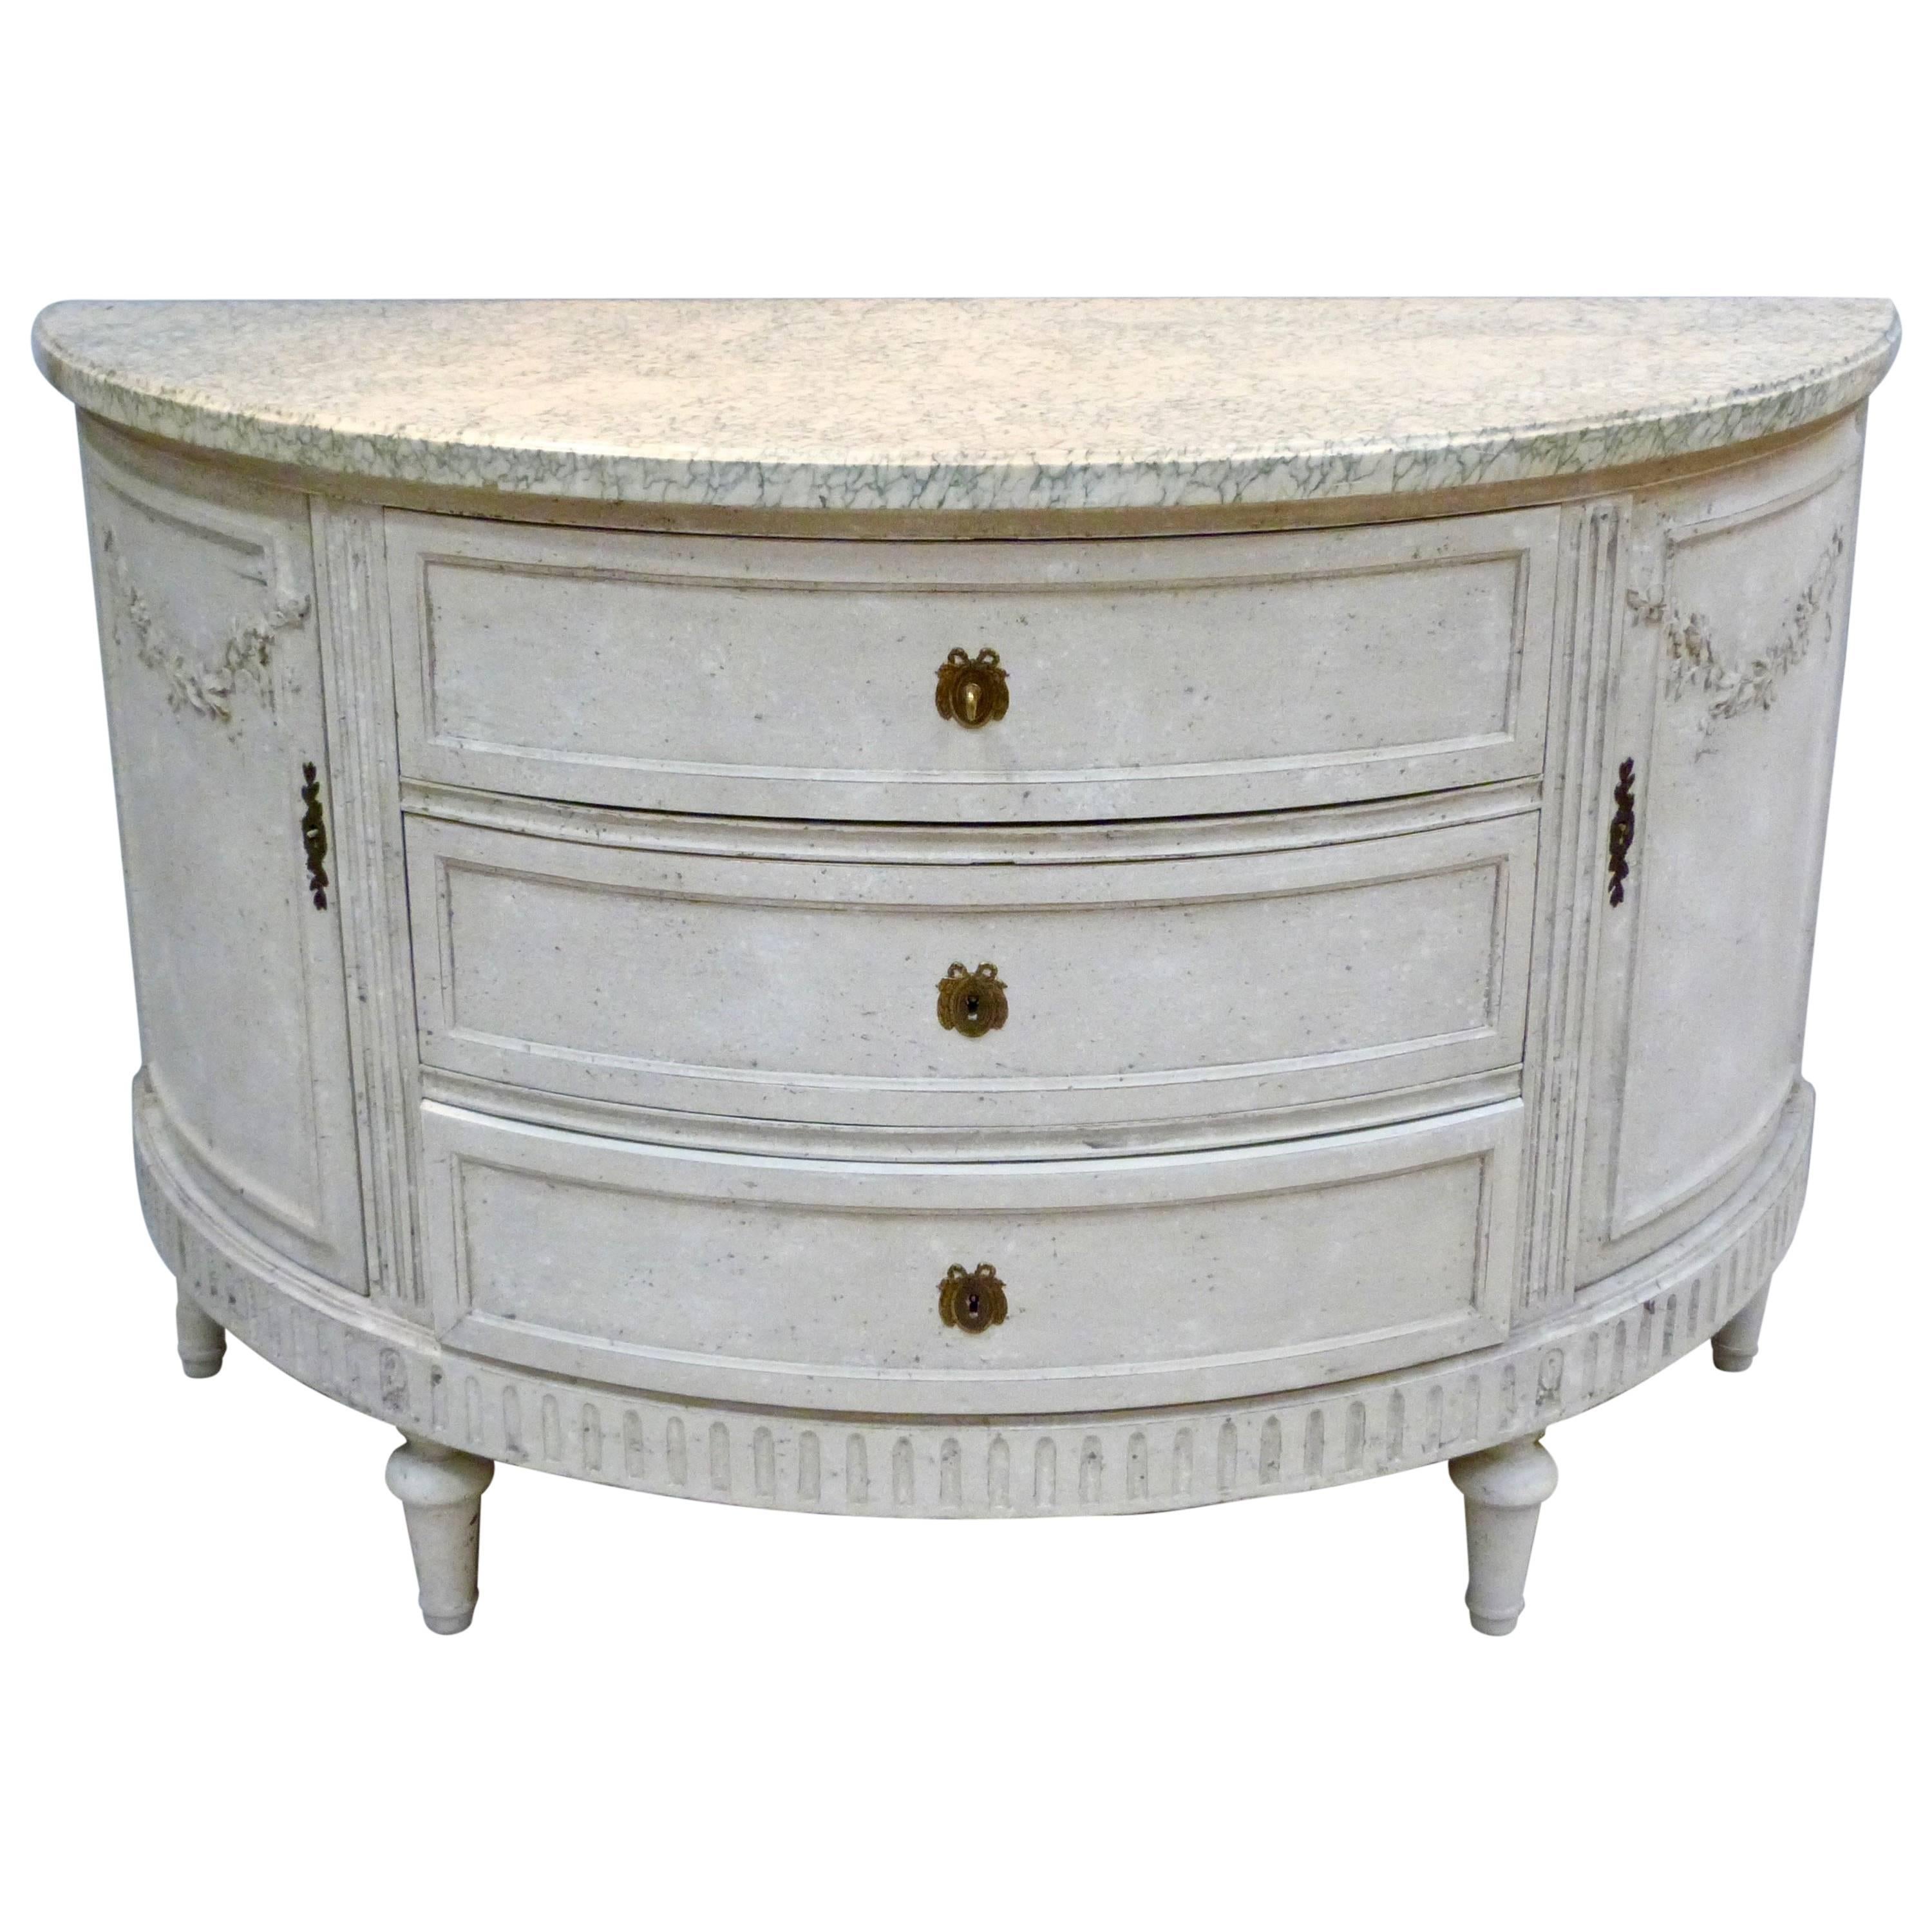 Decorative French Painted Commode, Cupboard For Sale